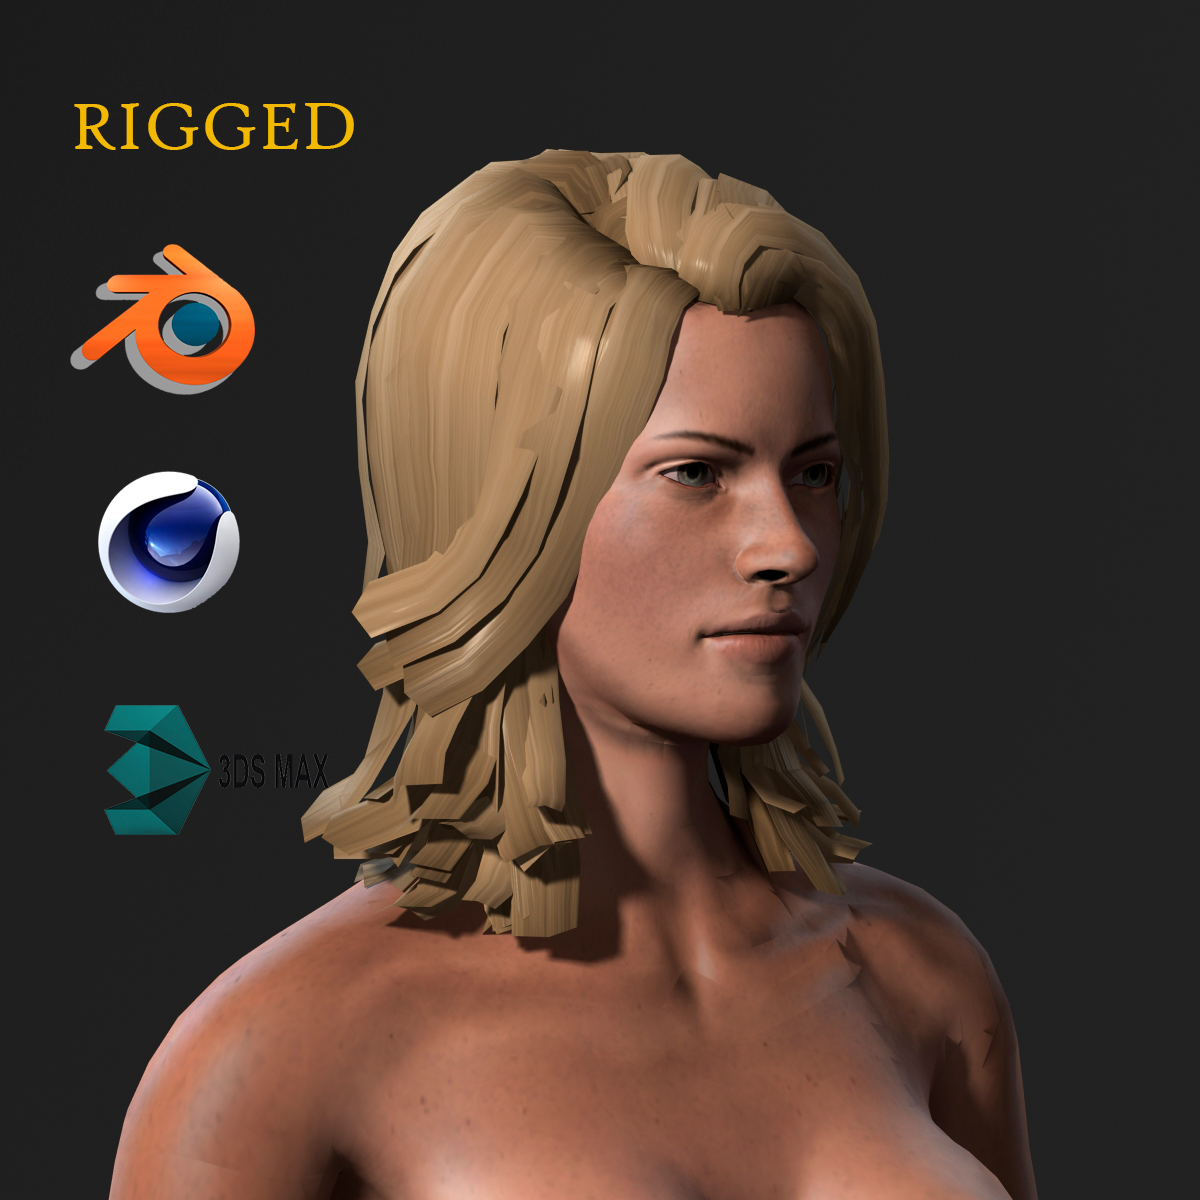 Naked Woman Rigged D Game Character Low Poly Cad Files Dwg Files The